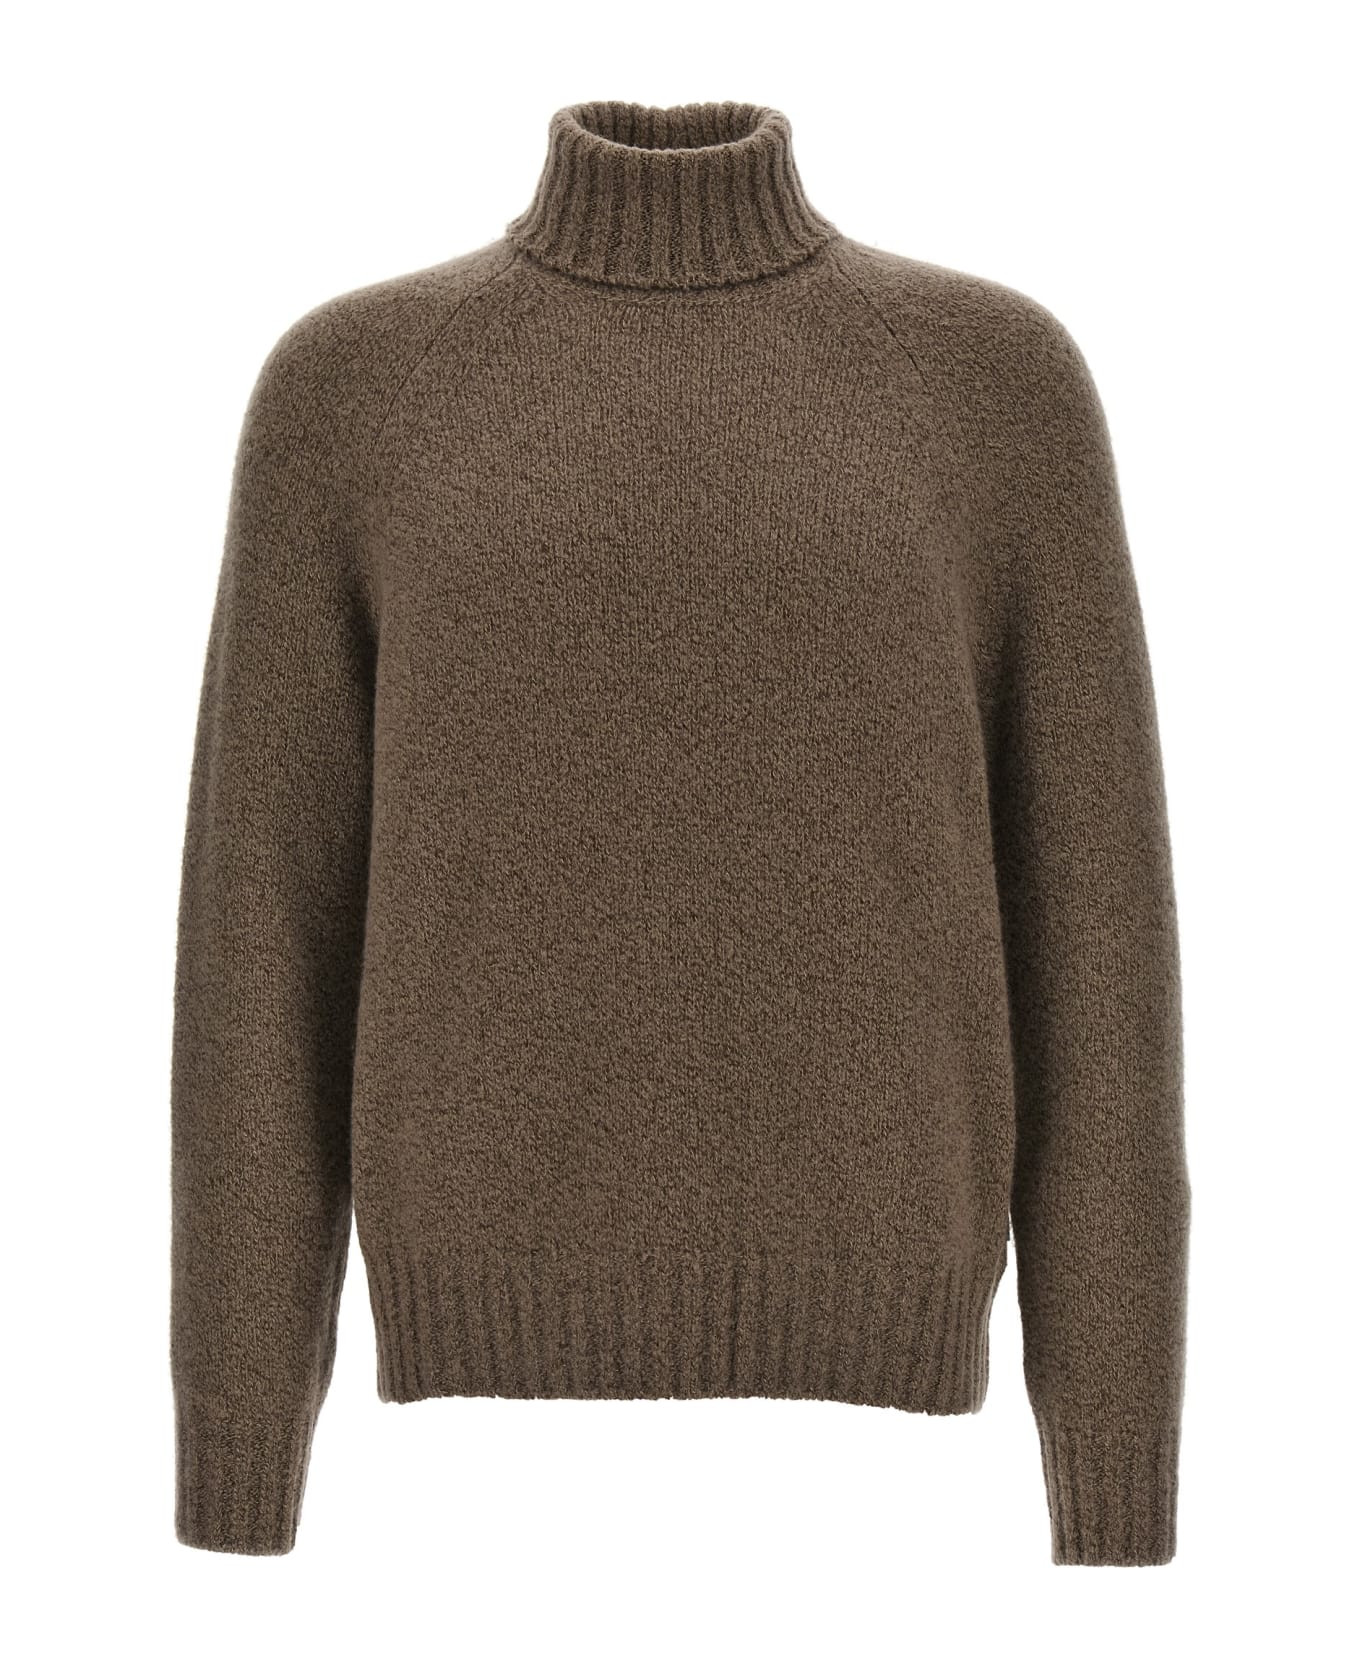 Zegna Boucle Silk Cashmere Sweater - BROWN ニットウェア